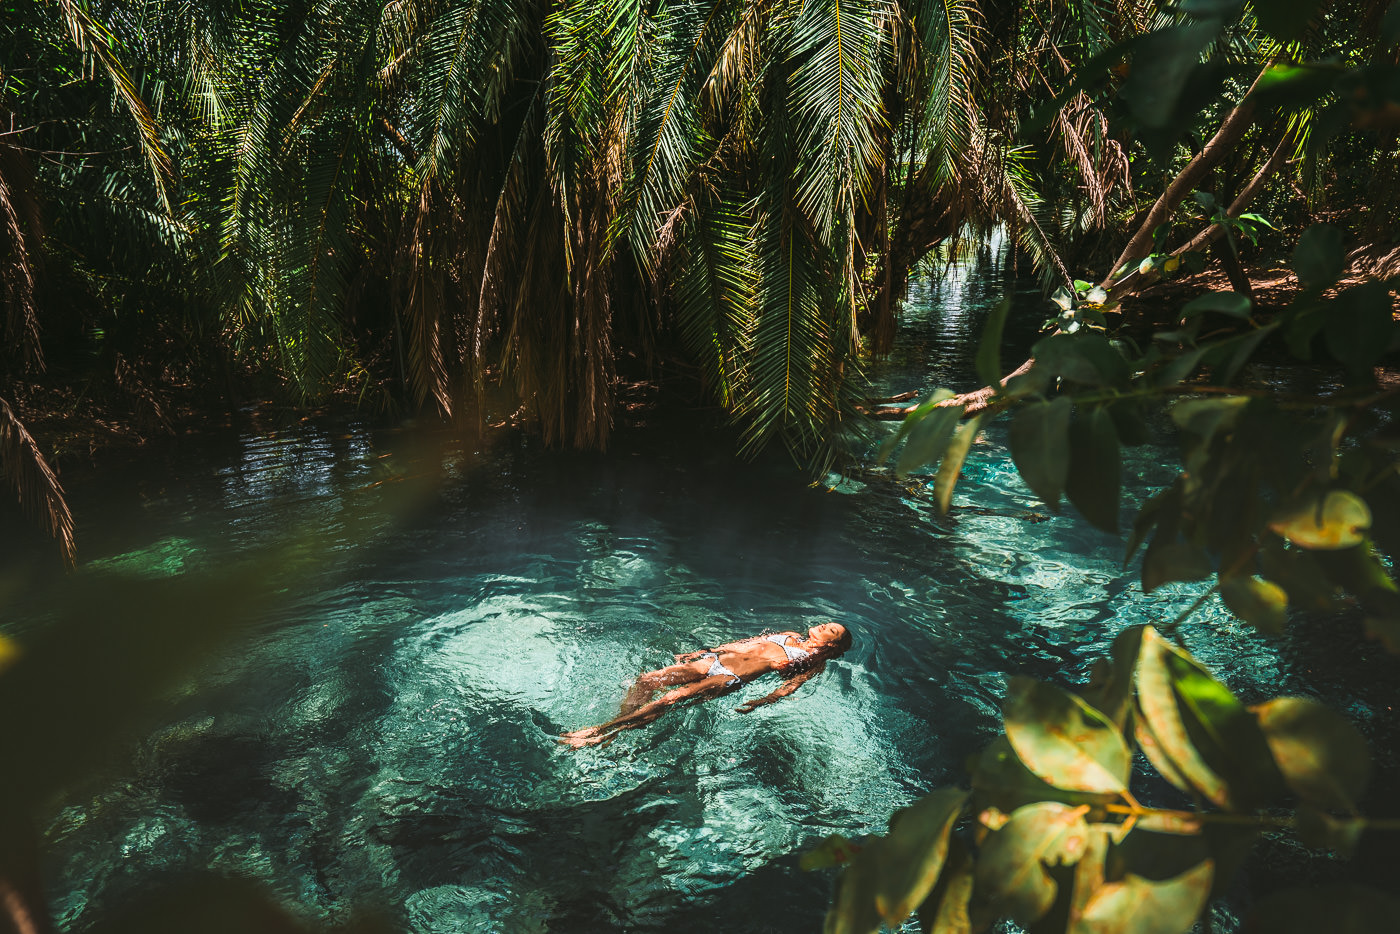 a person floating in a body of water surrounded by trees.